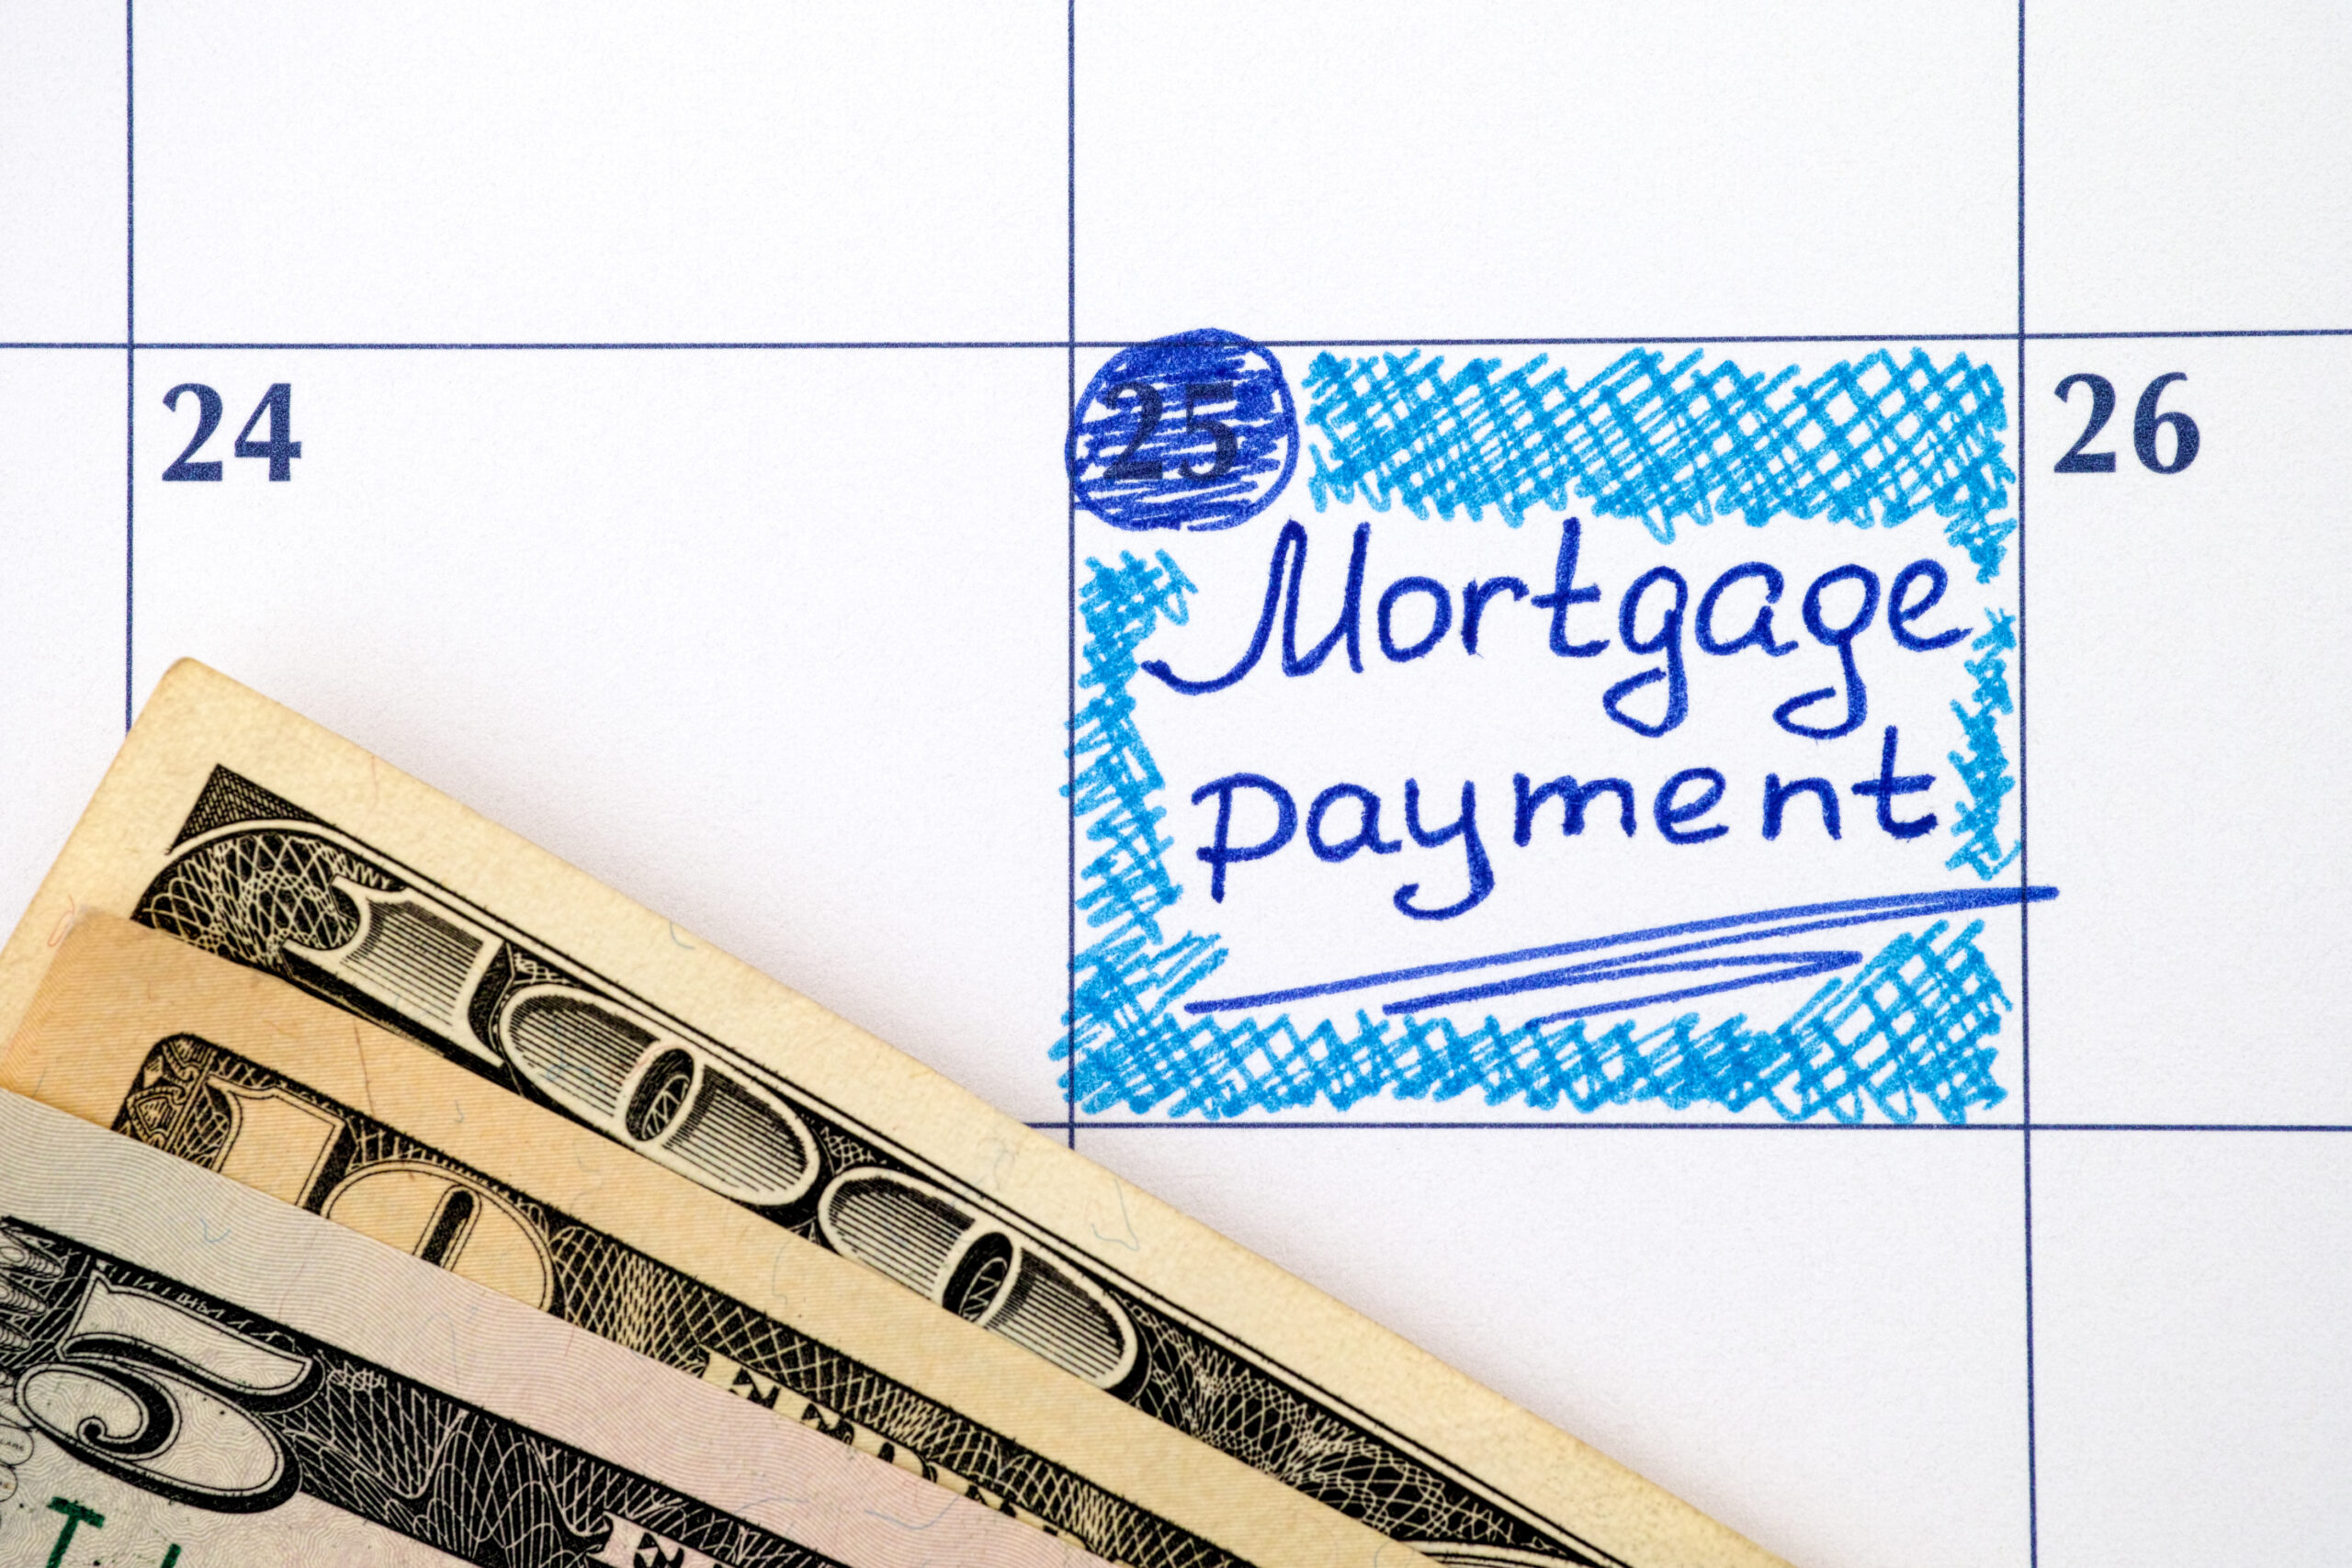 Mortgage Payment Label on Calendar with Cash